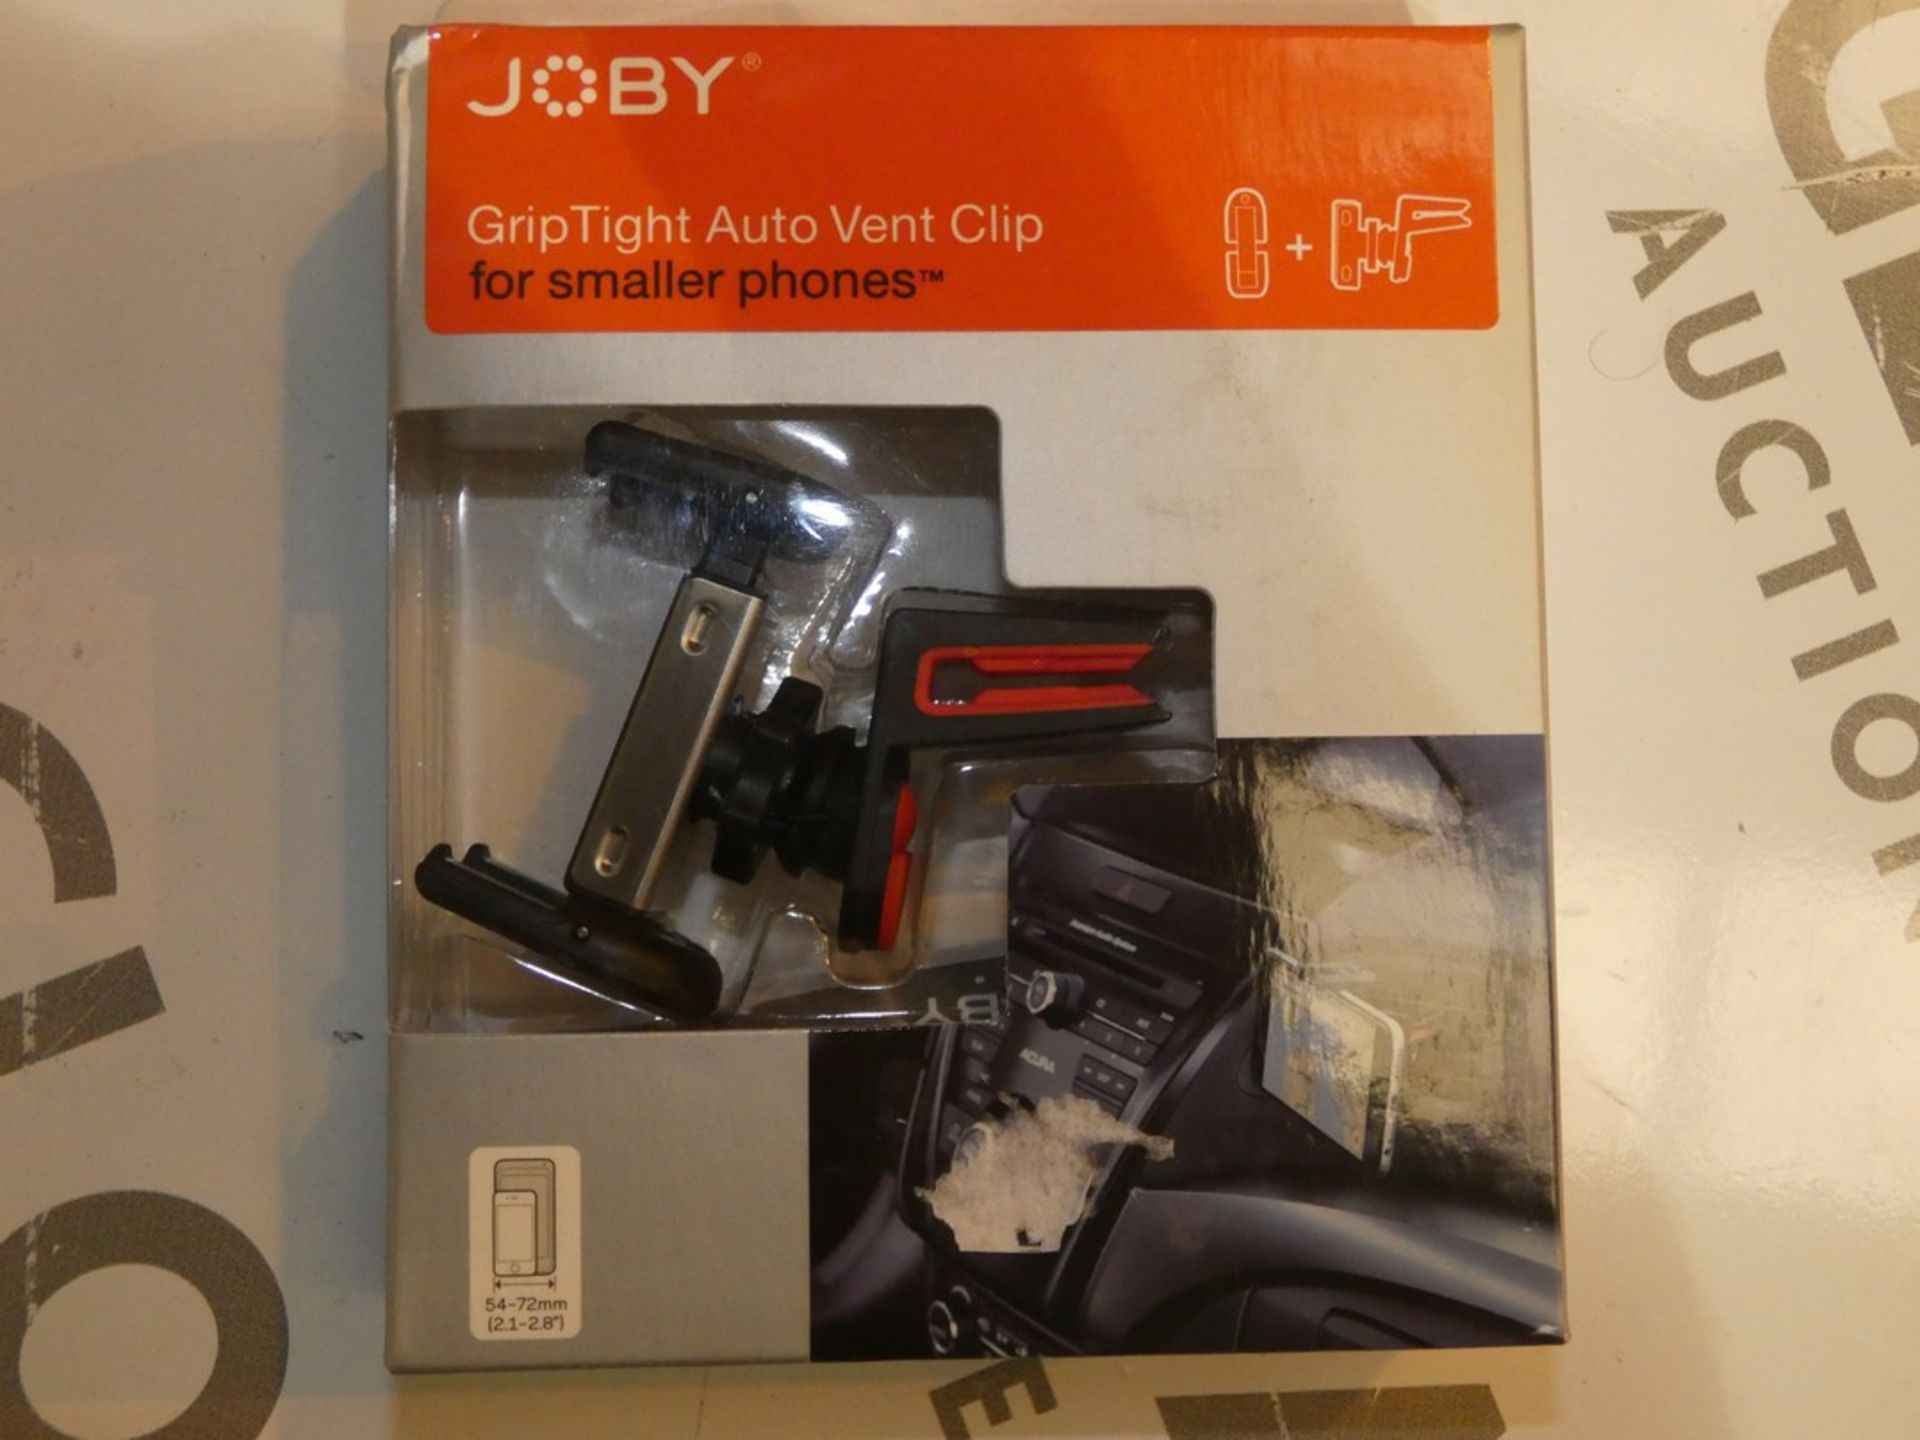 Boxed Joby Grip Tight Auto Vent Clips For Smaller Phones RRP £30 Each